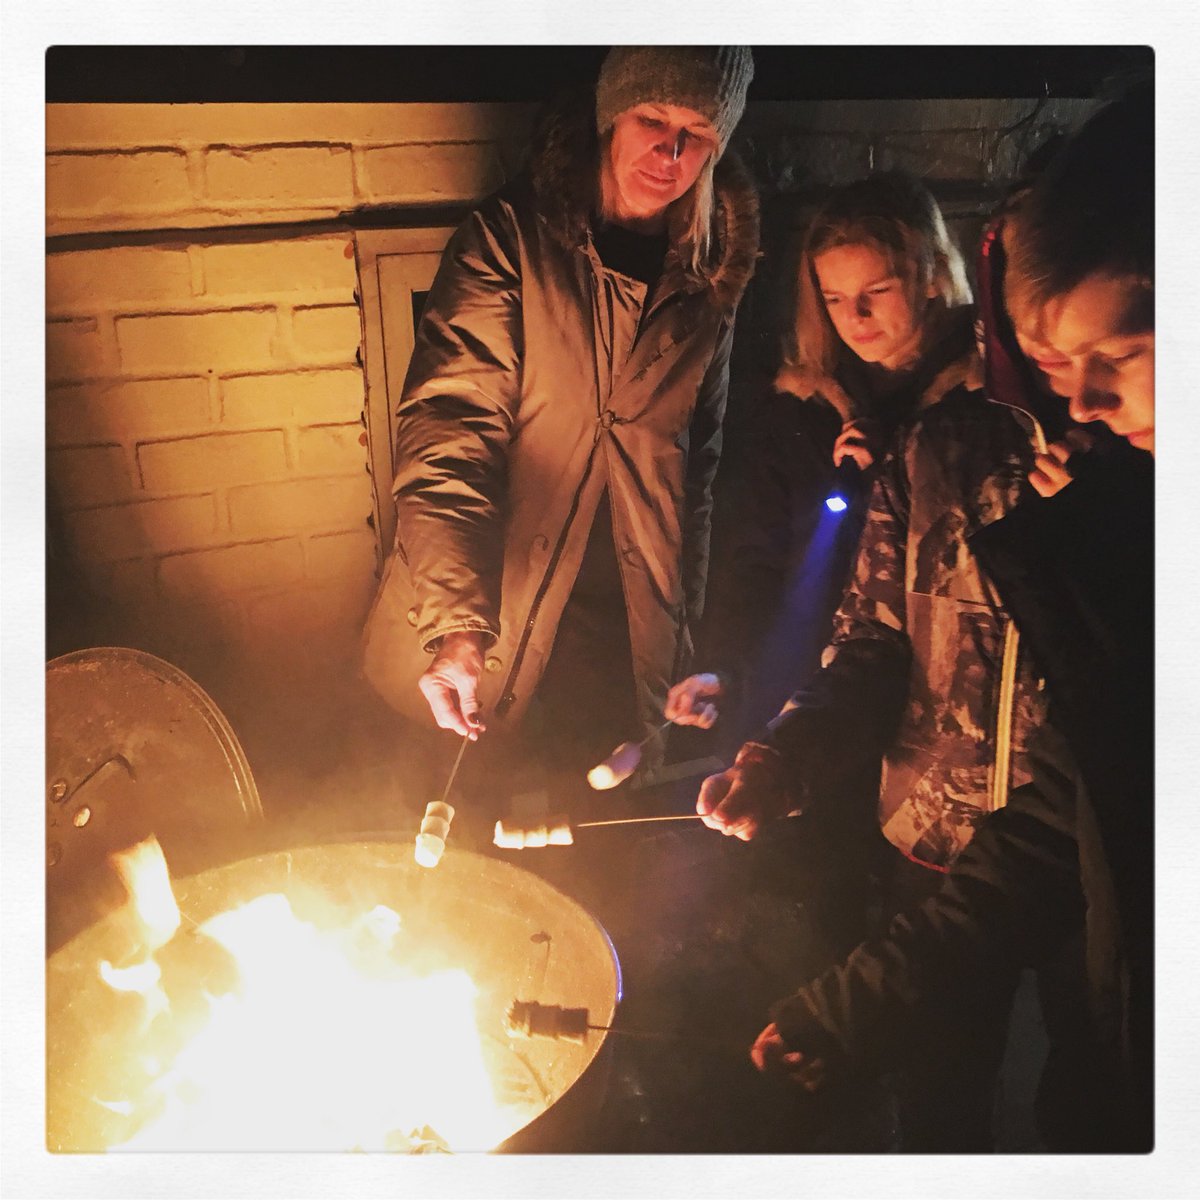 At #Bravedog we are supporting @youth_adventure in their #yearofadventure campaign. January was cooking on a fire outside! Surely marshmallows count?! #fundraising #charity #giving #family